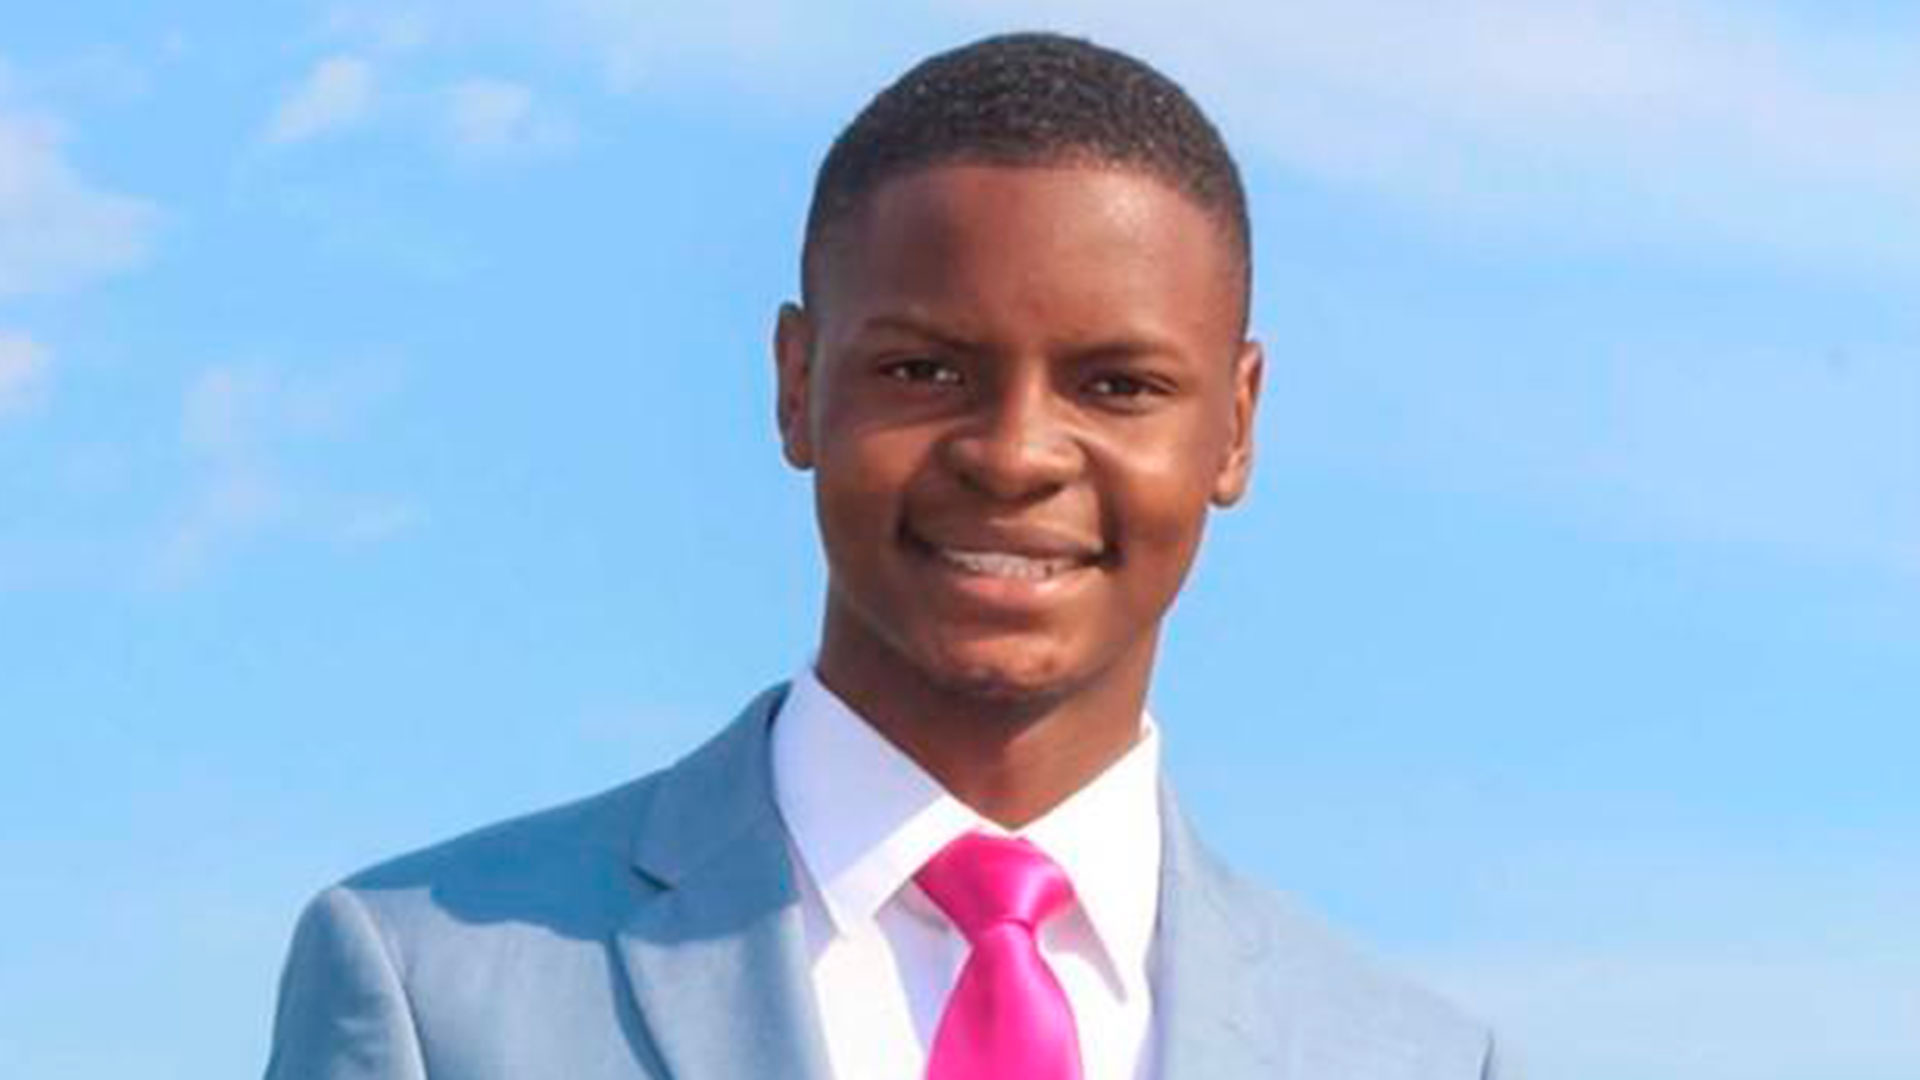 Jaylen Smith was elected Earle mayor in the runoff election Tuesday, with 235 votes to Nemi Matthews' 183, according to unofficial results.